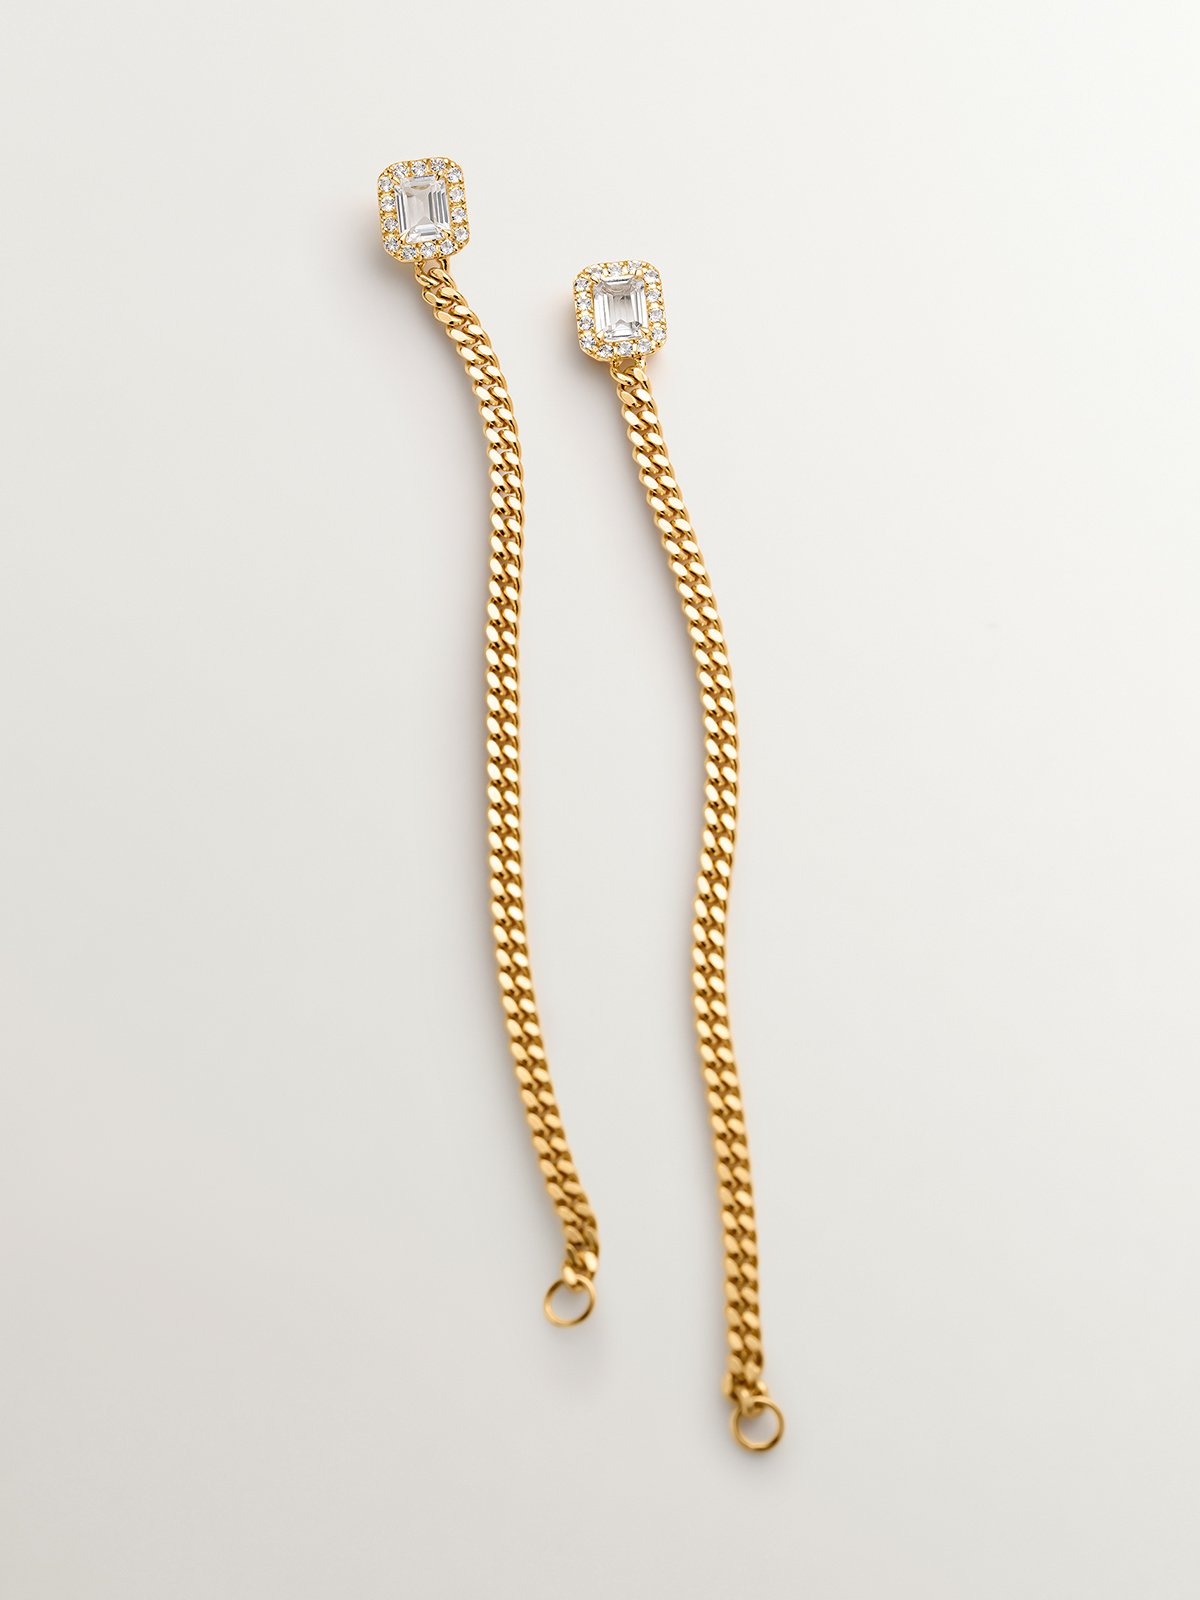 925 Silver barbed chain earrings coated in 18K yellow gold with topazes.